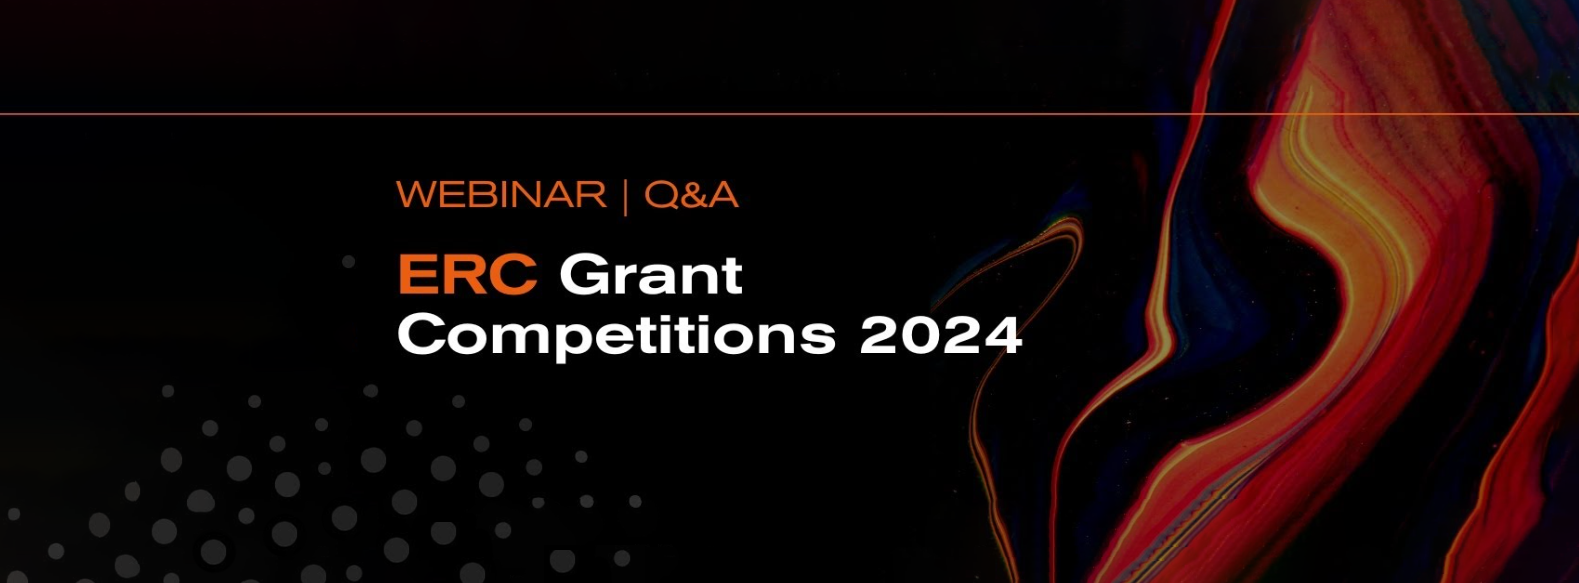 ERC Grant Competitions